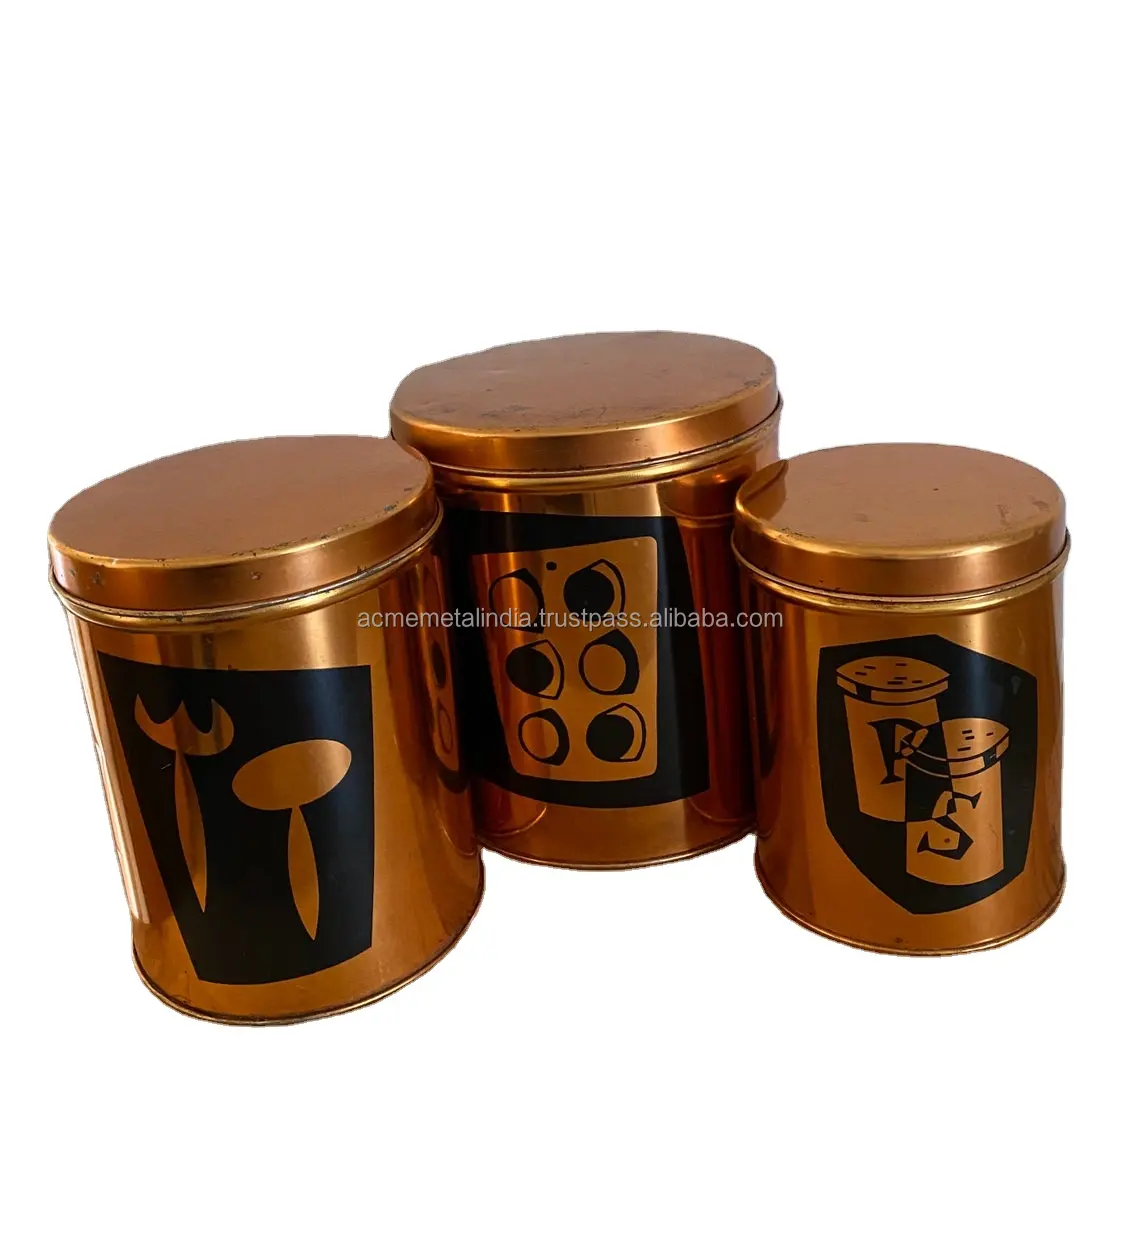 Classical Tin Canister Set Of Three Copper Color Tins With Black Graphite Countertop Storage Organizational Container And Jar